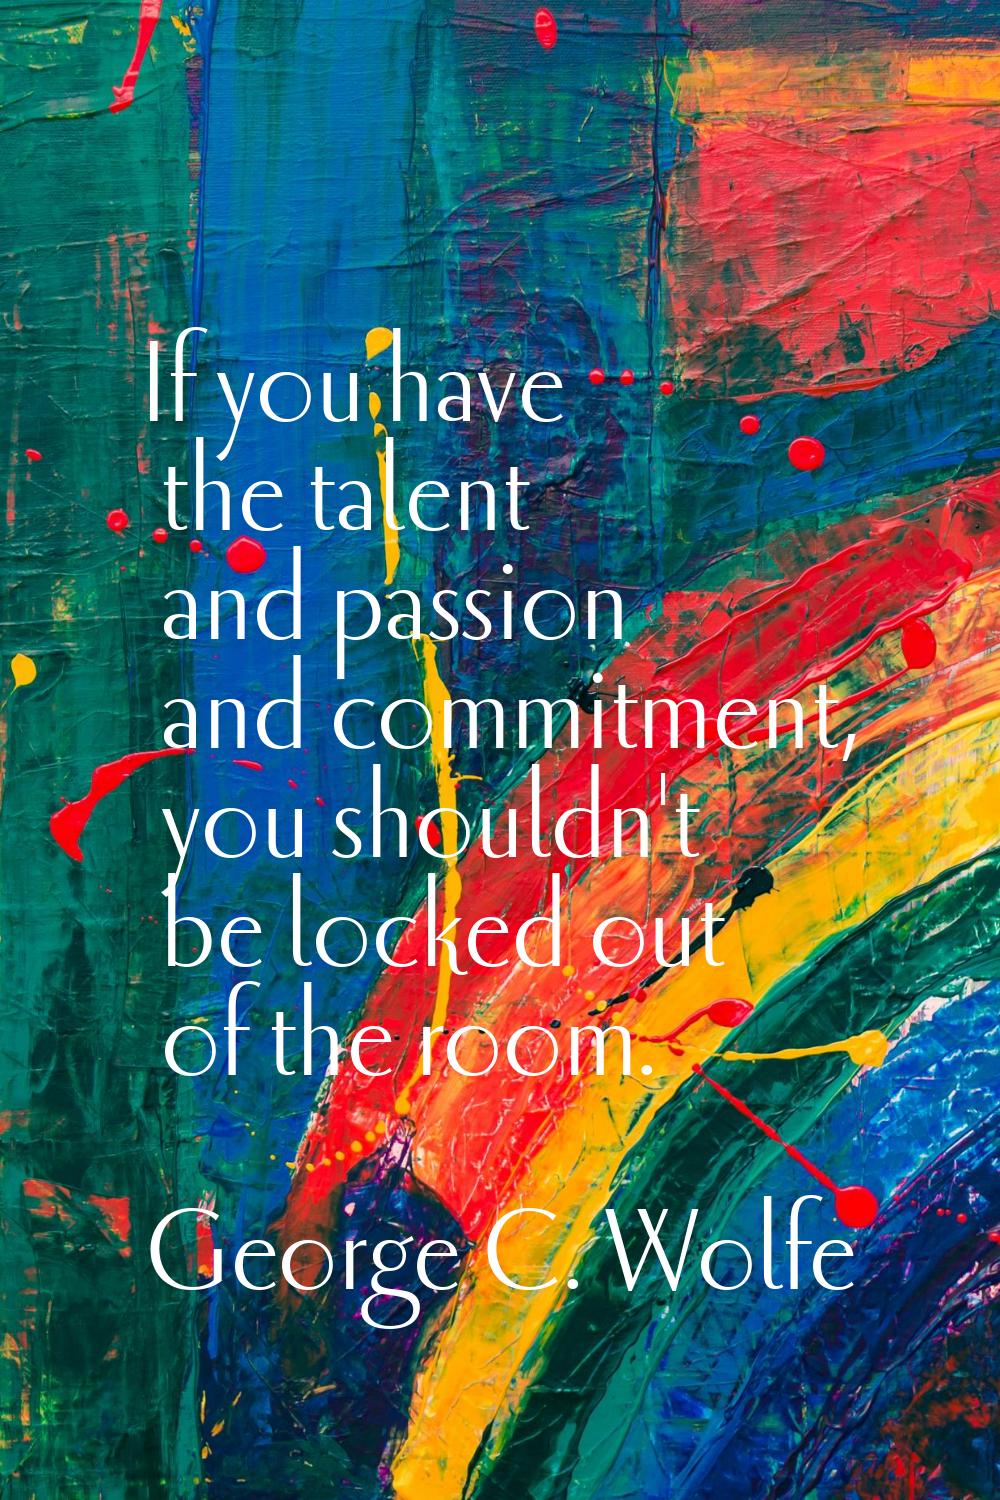 If you have the talent and passion and commitment, you shouldn't be locked out of the room.